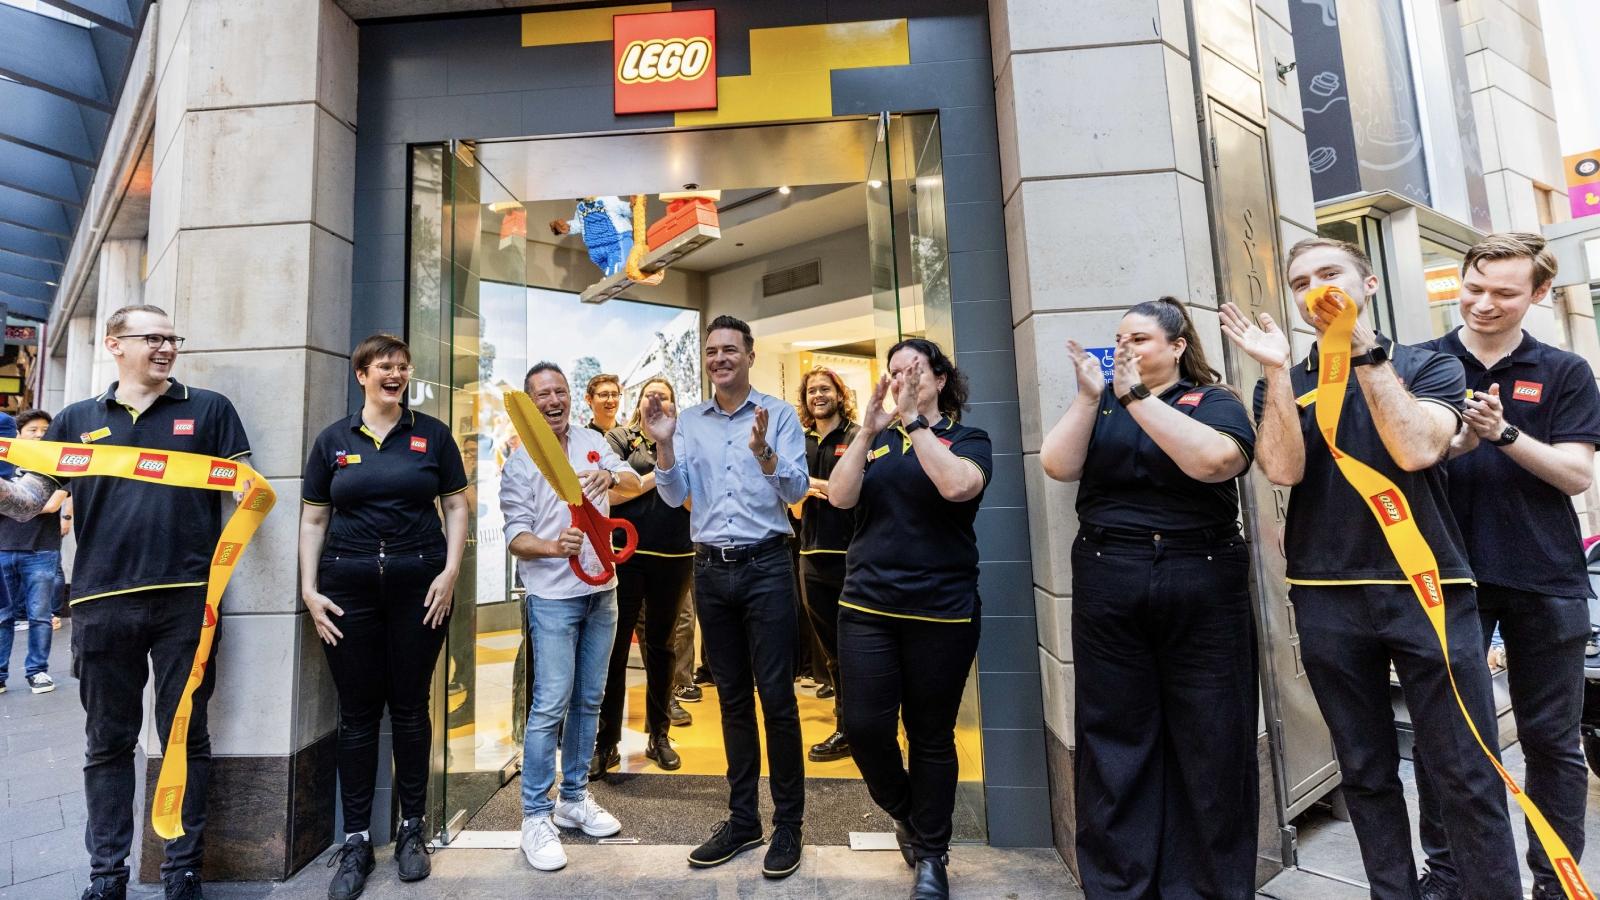 LEGO Store employees standing outside the Syndey Store.